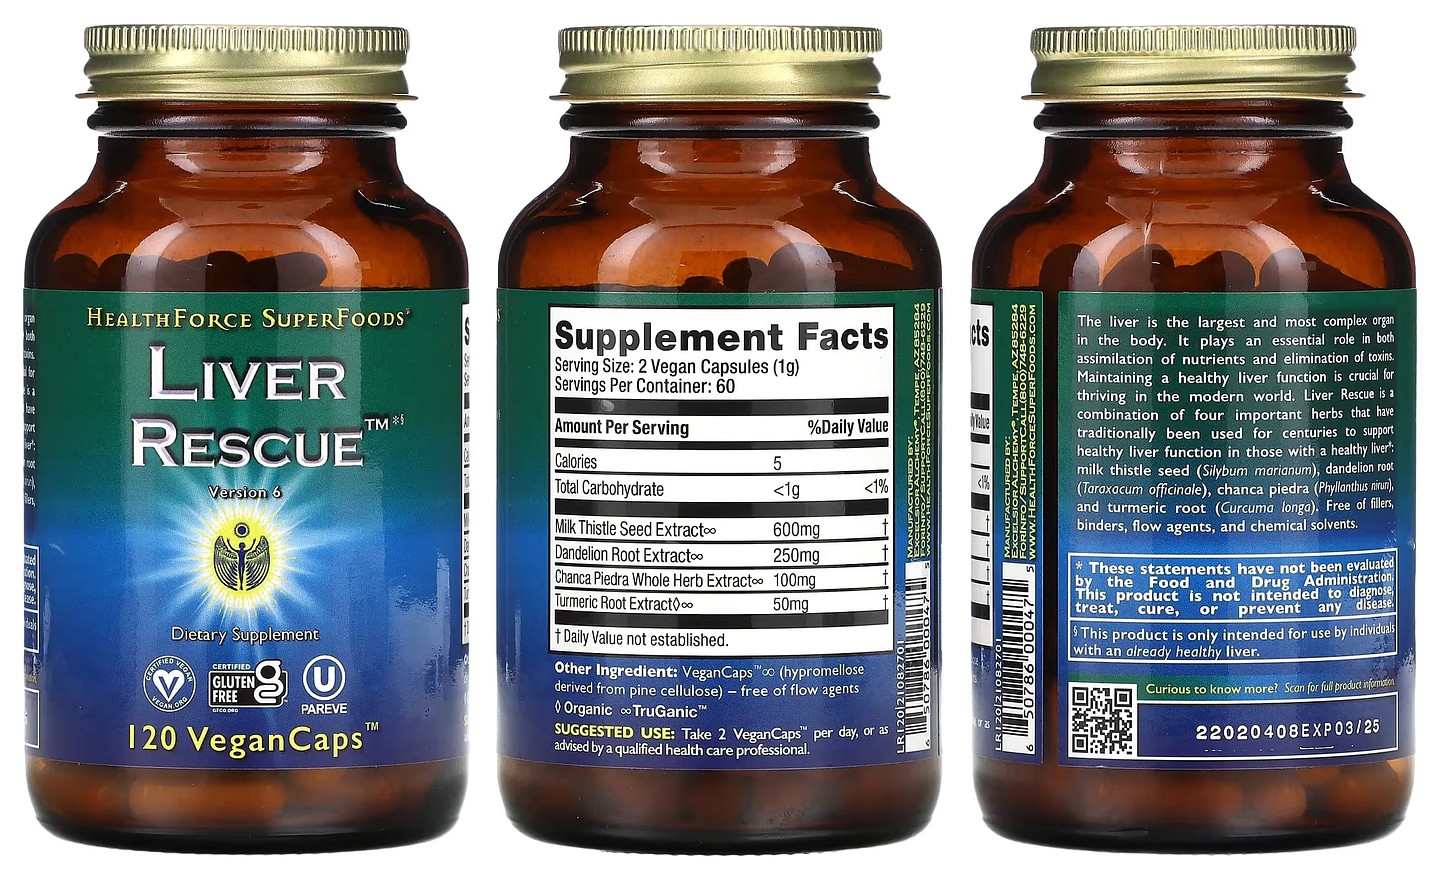 HealthForce Superfoods, Liver Rescue packaging